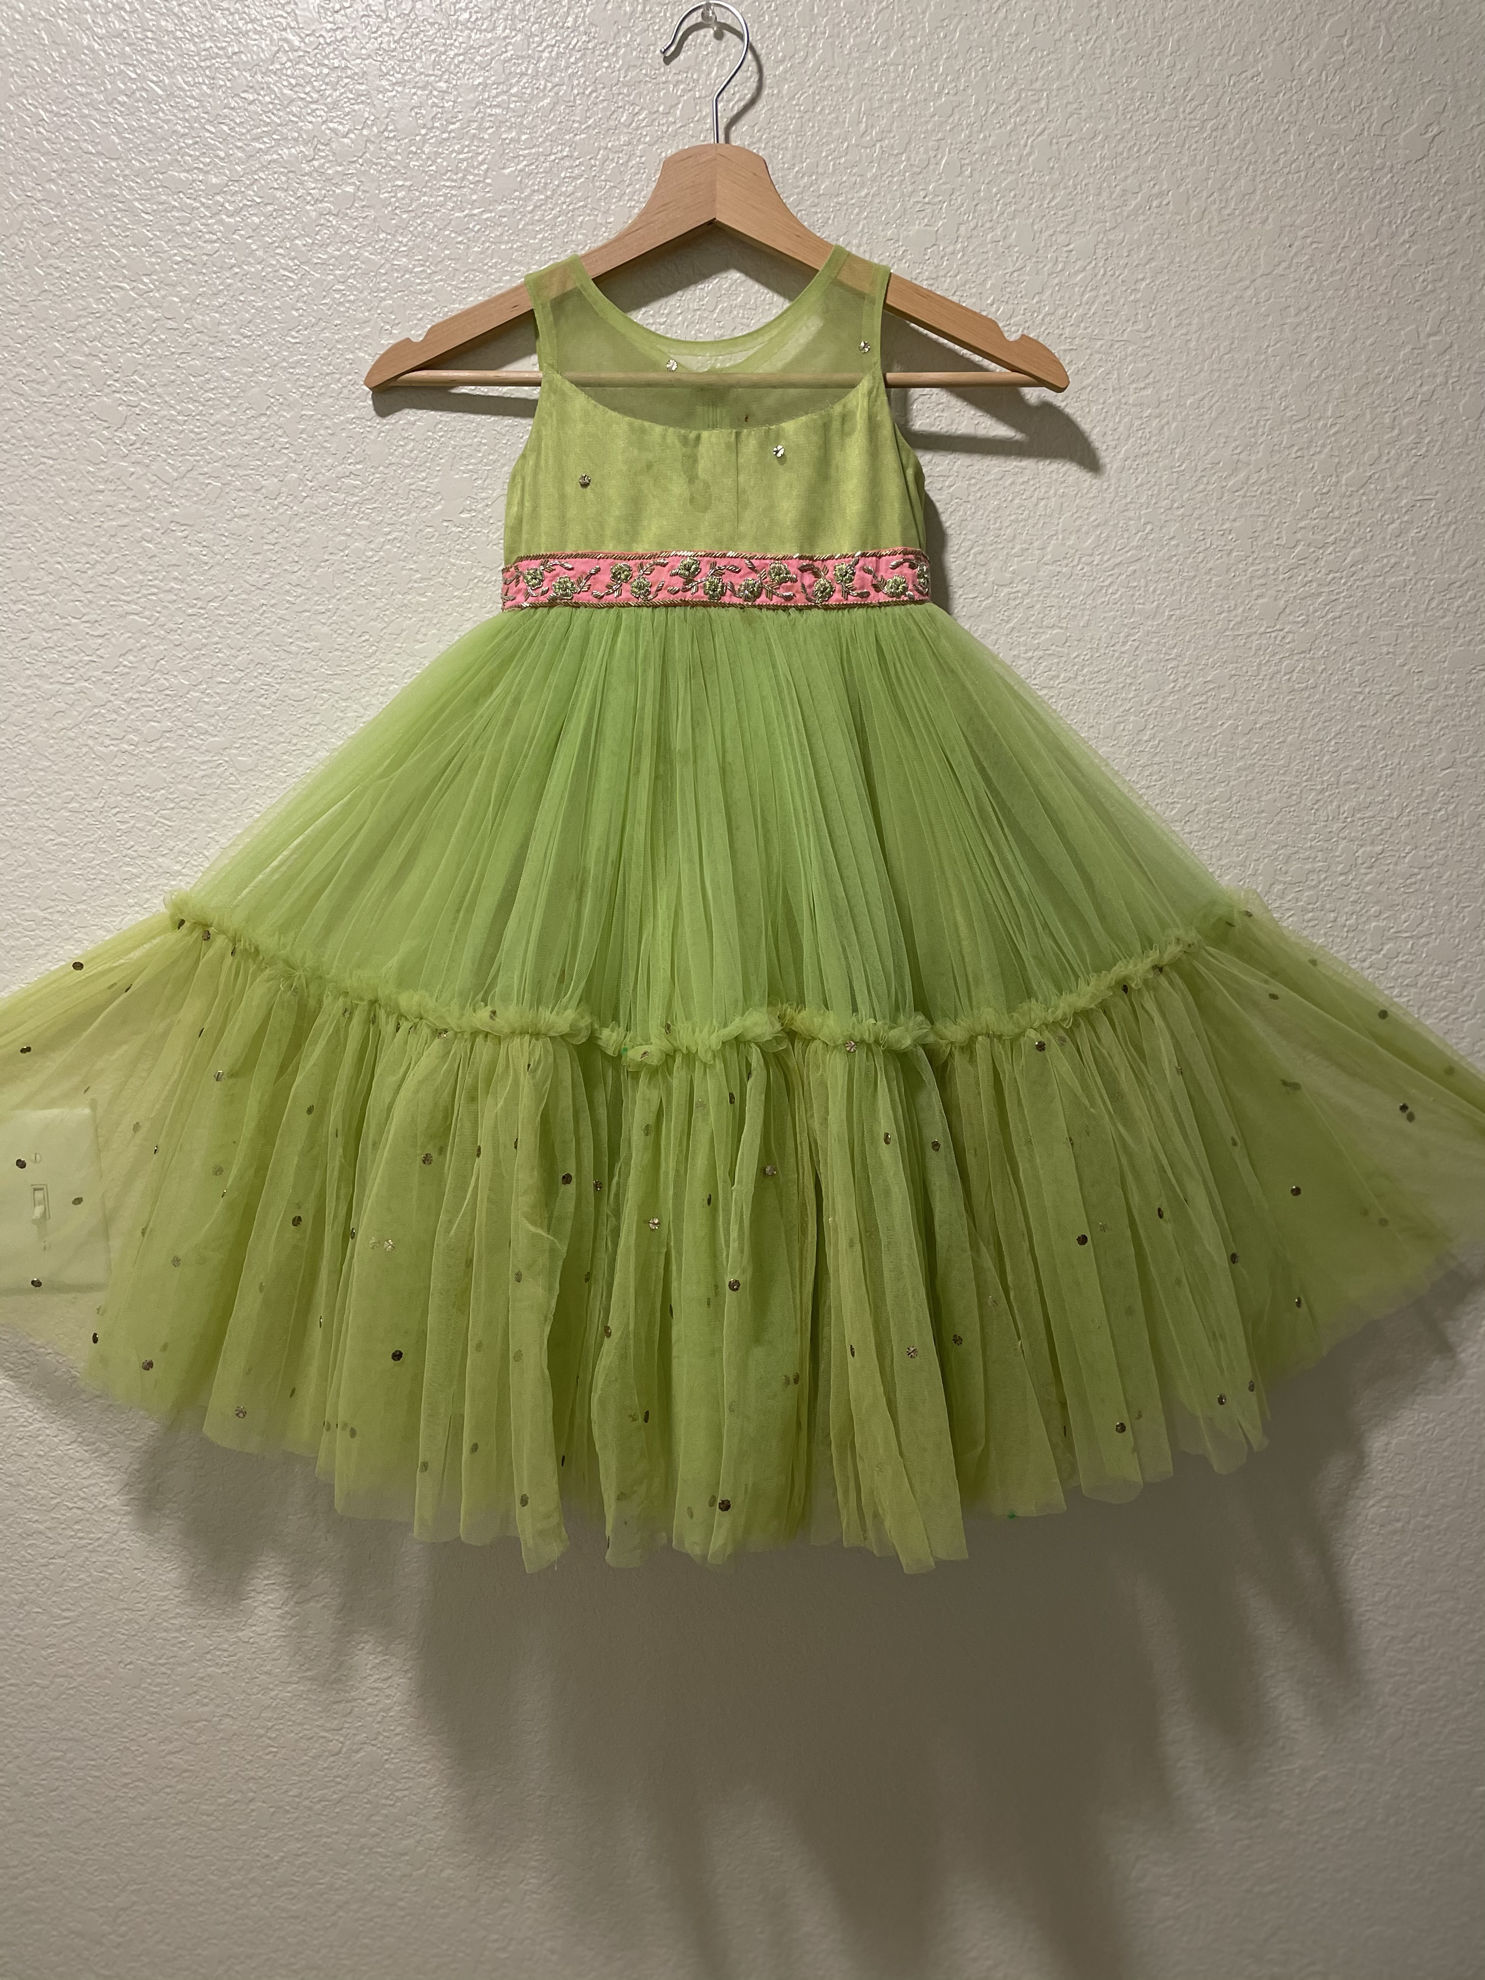 PunarviAuthentic|PreLoved|SustainableLime green net dress